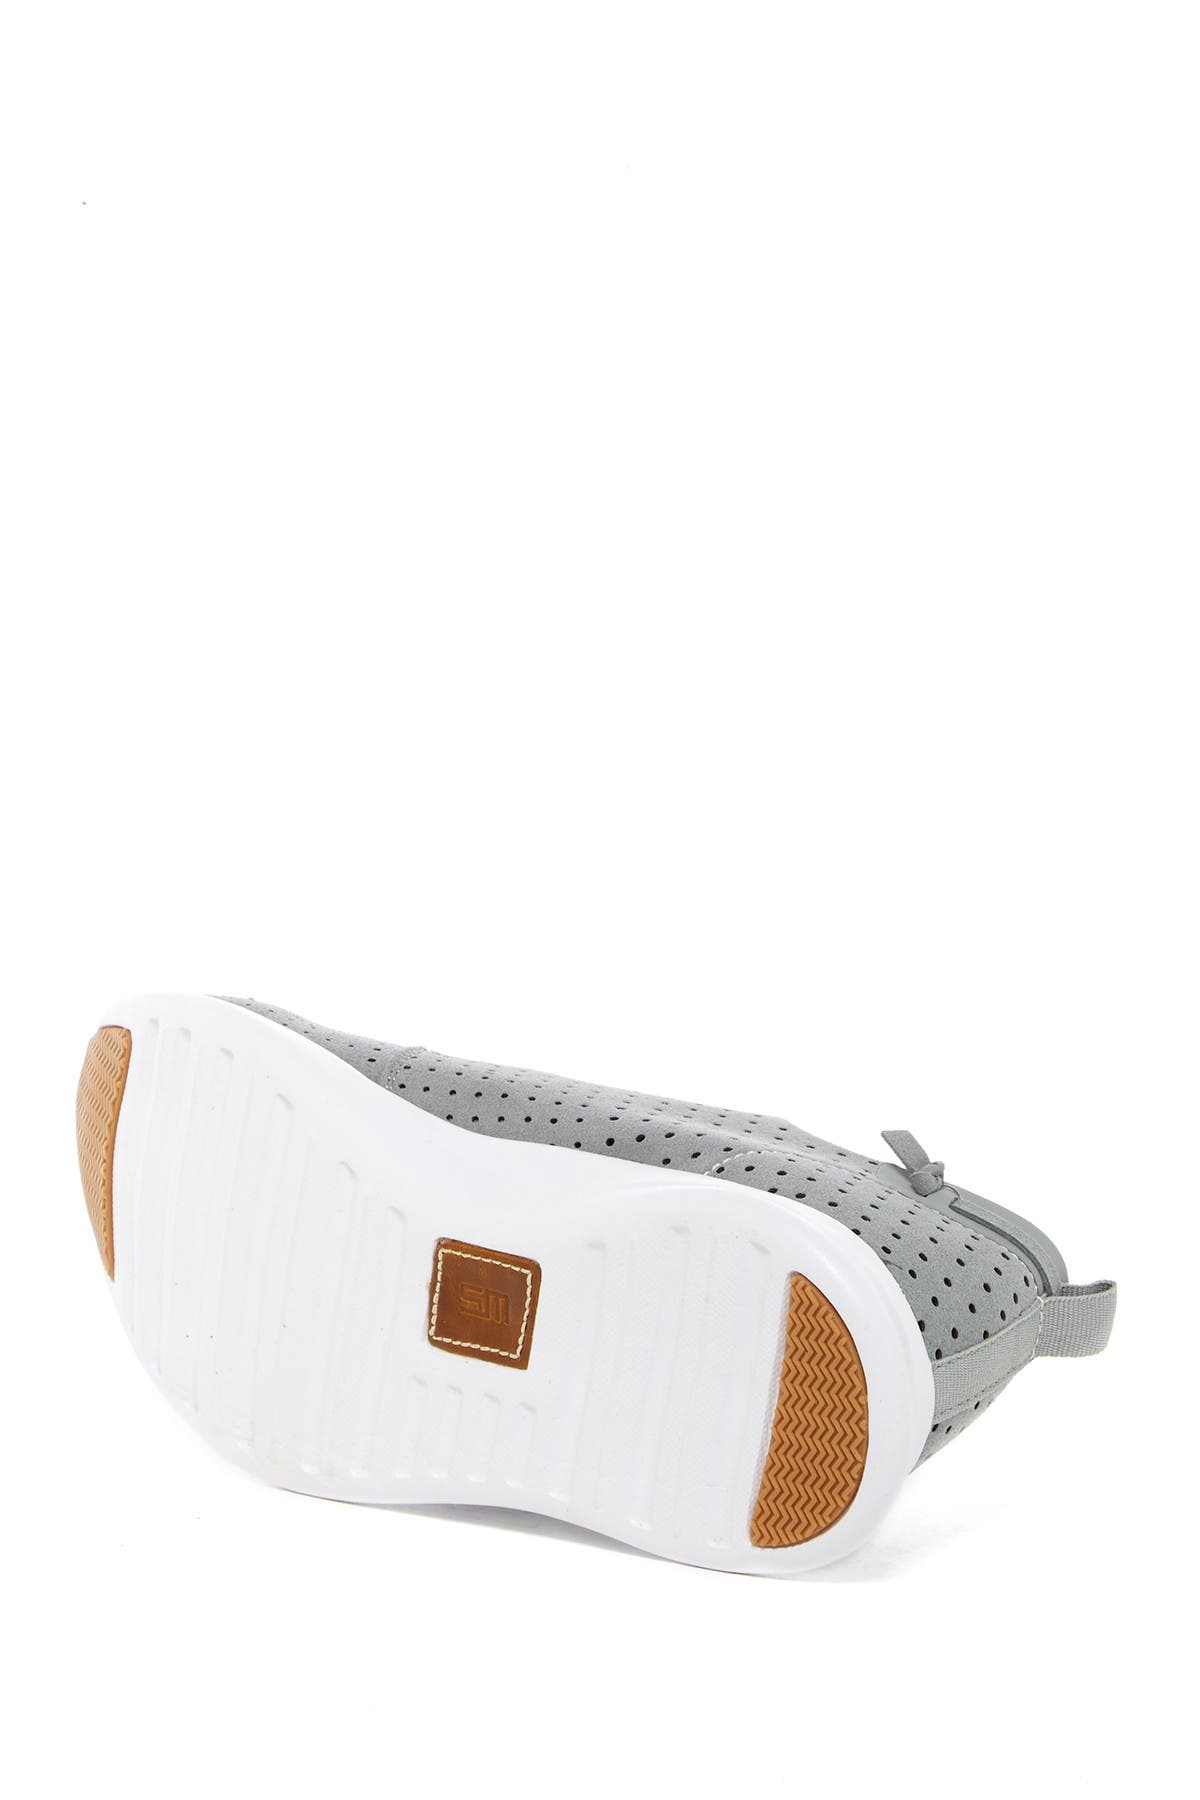 Steve Madden | Chyll Perforated Sneaker 